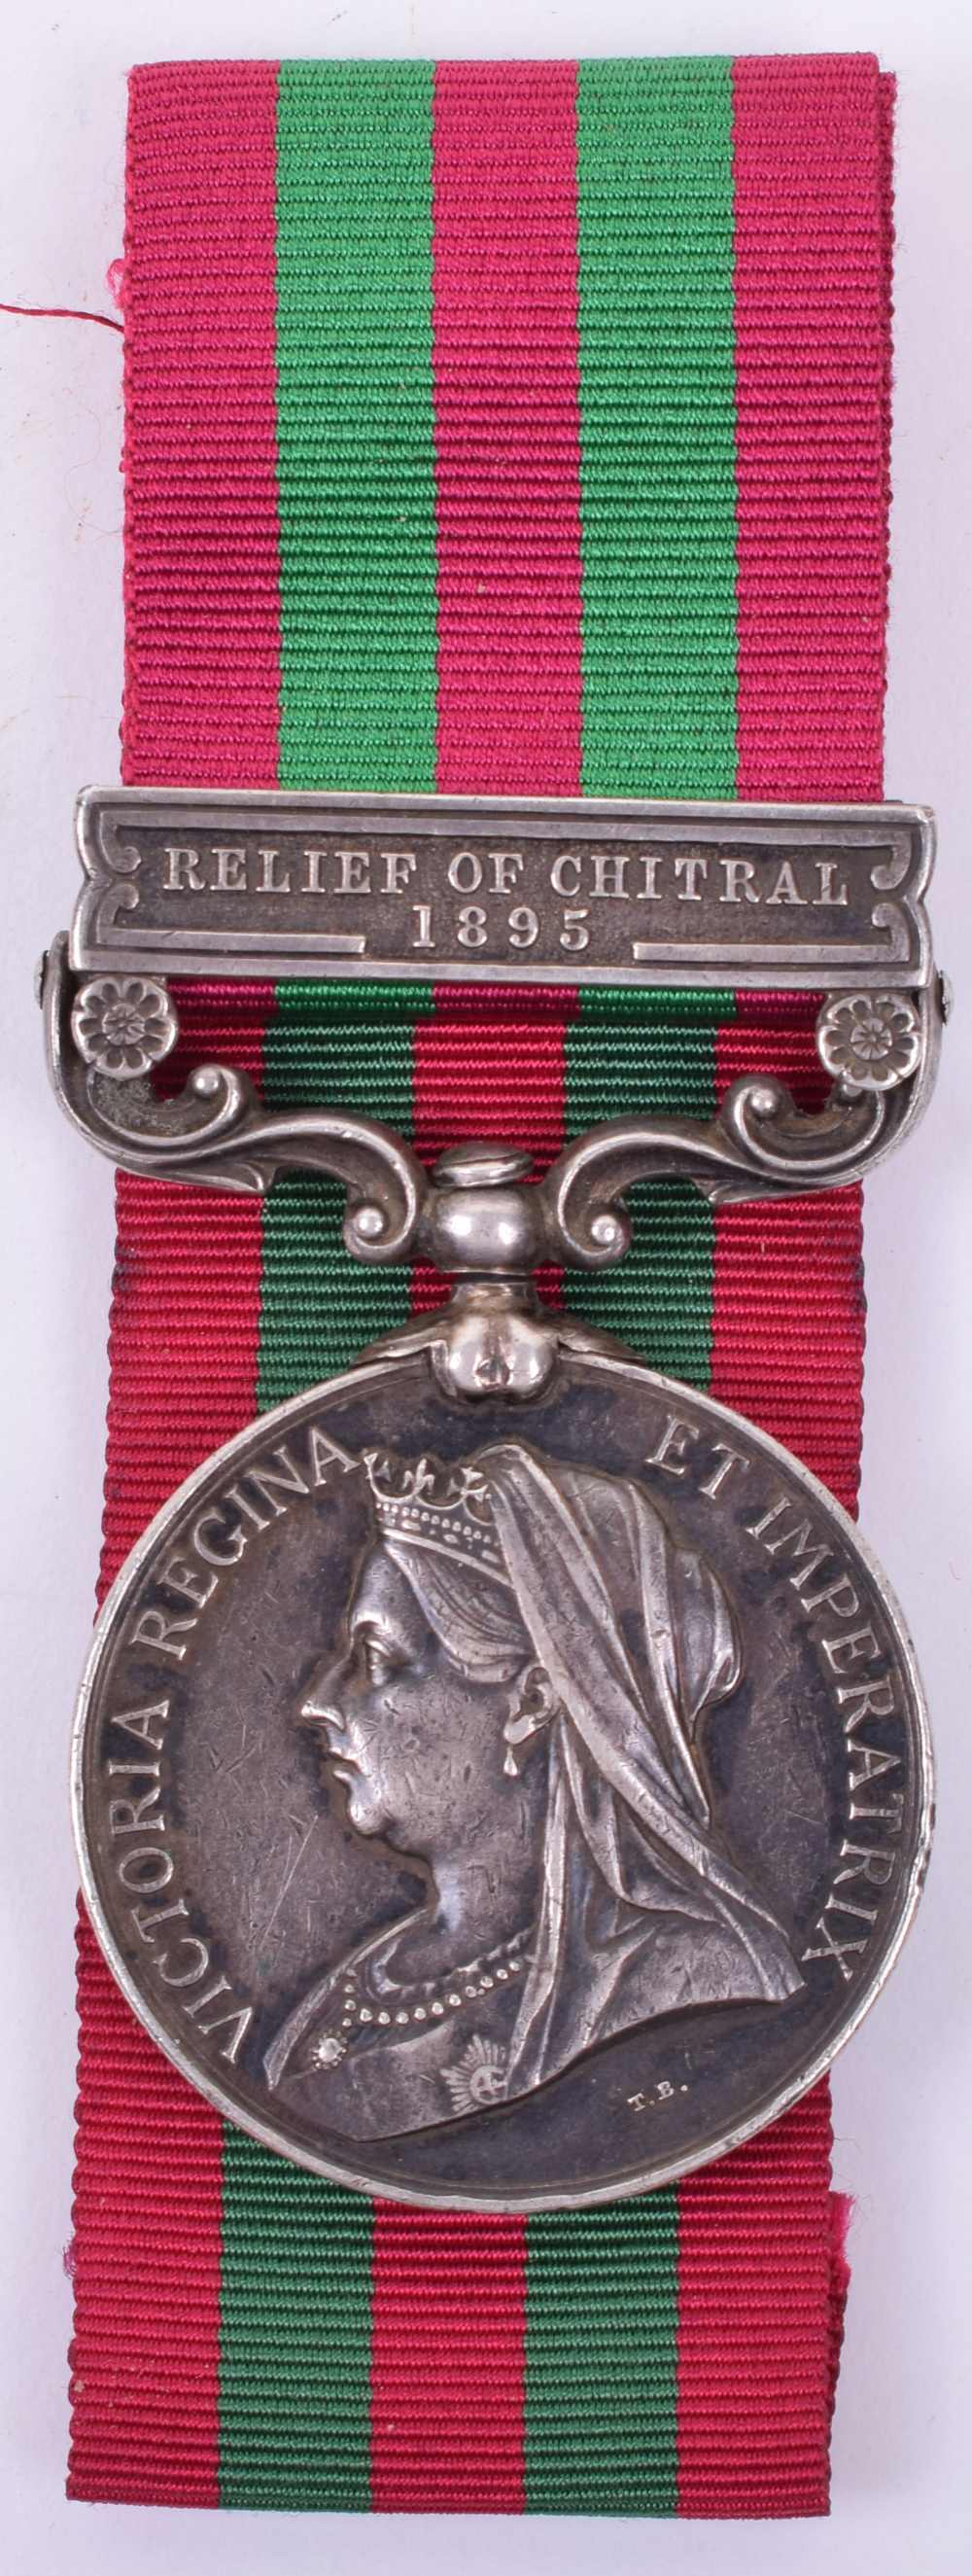 Seaforth Highlanders Chitral Operations Indian General Service Medal 1895-1902